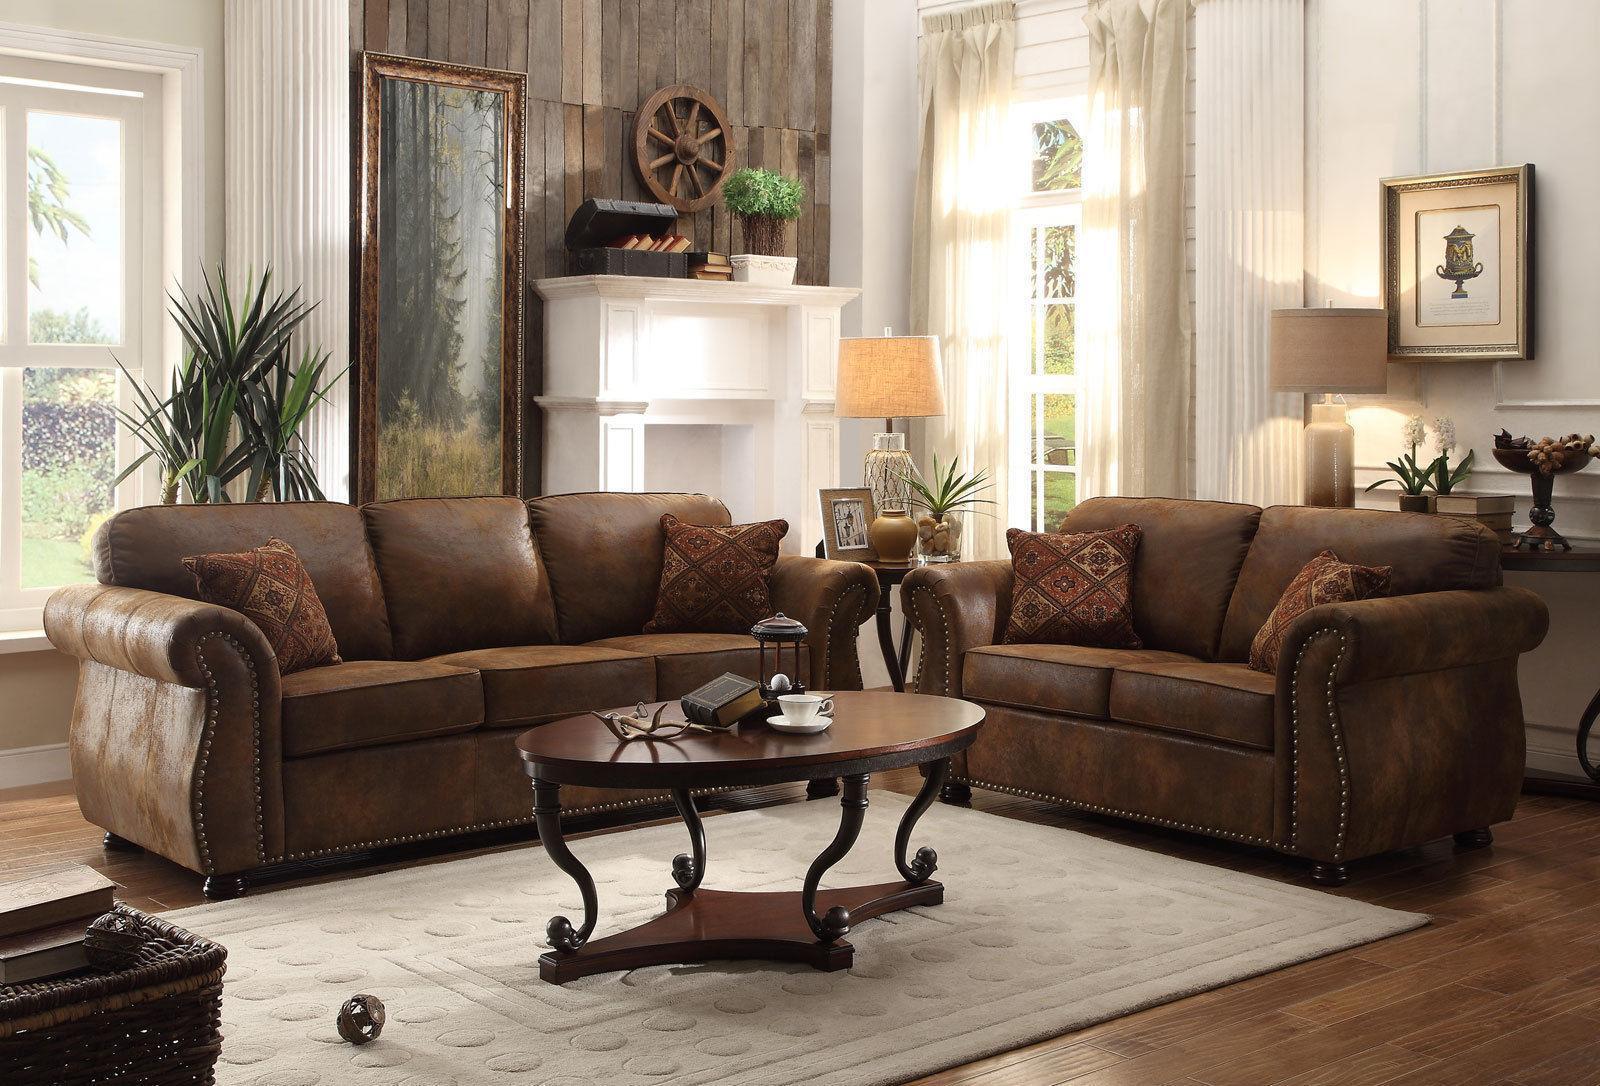 Rustic Living Room With Brown Couch